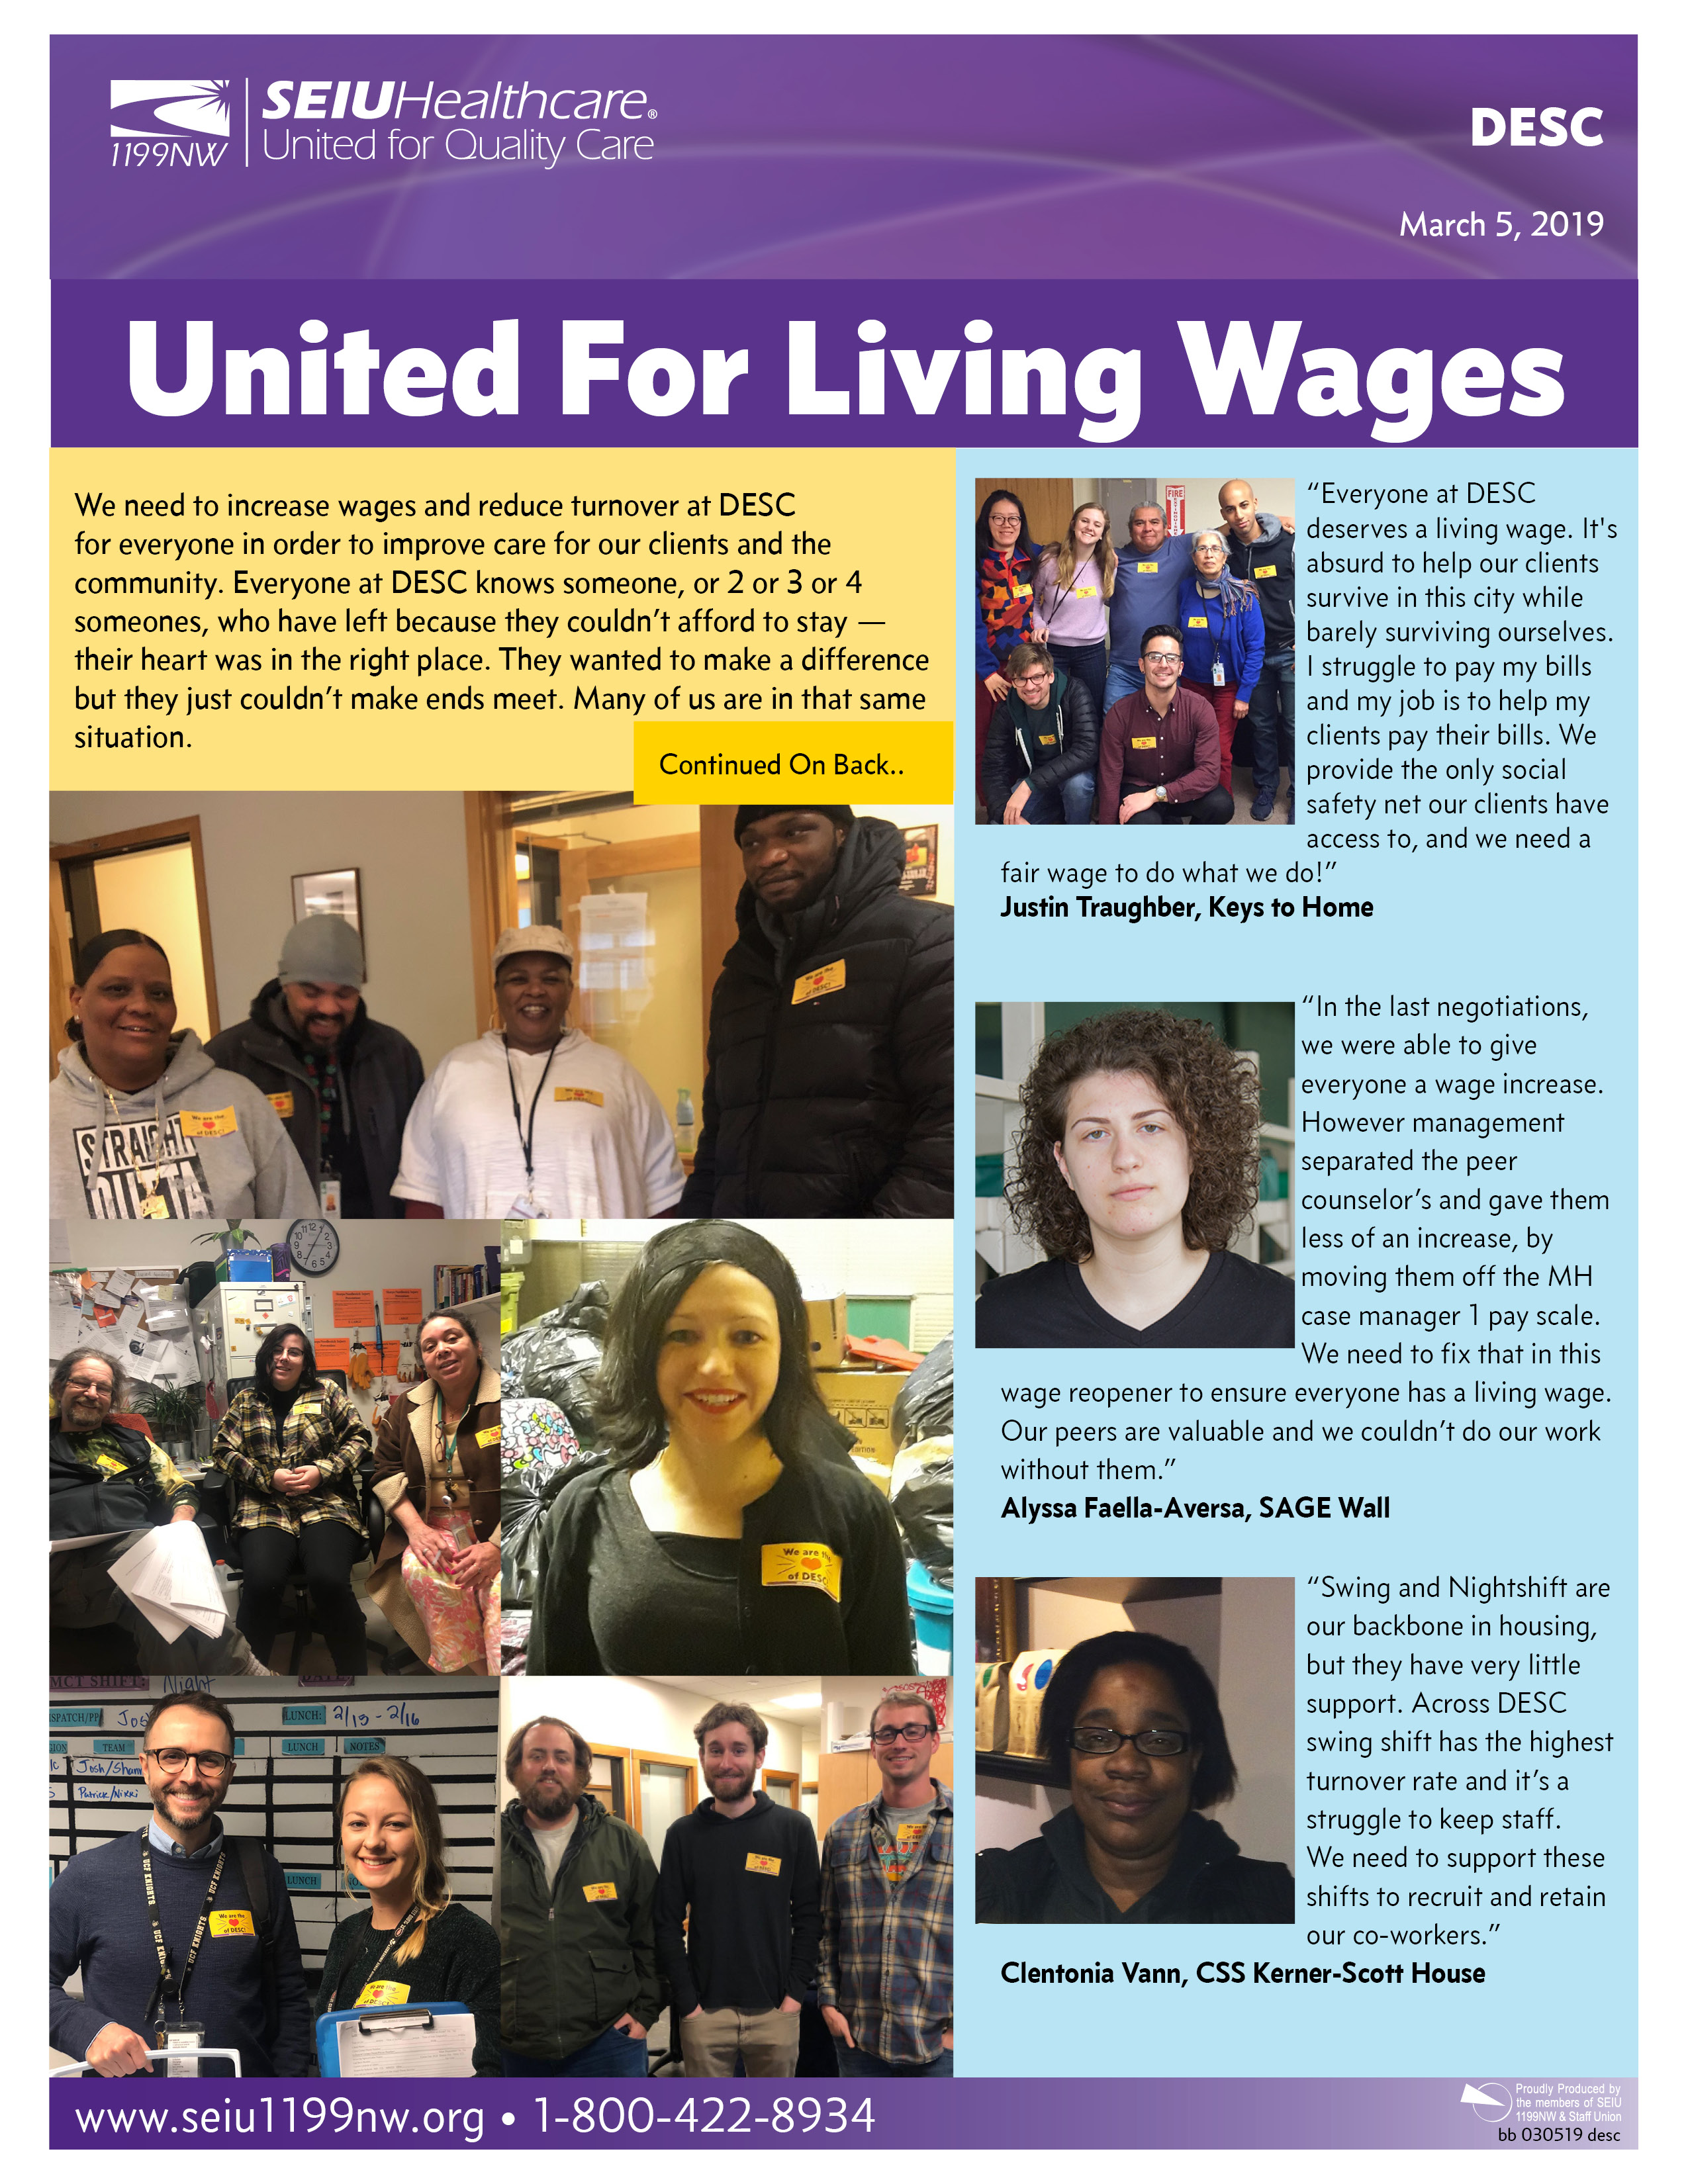 United For Living Wages